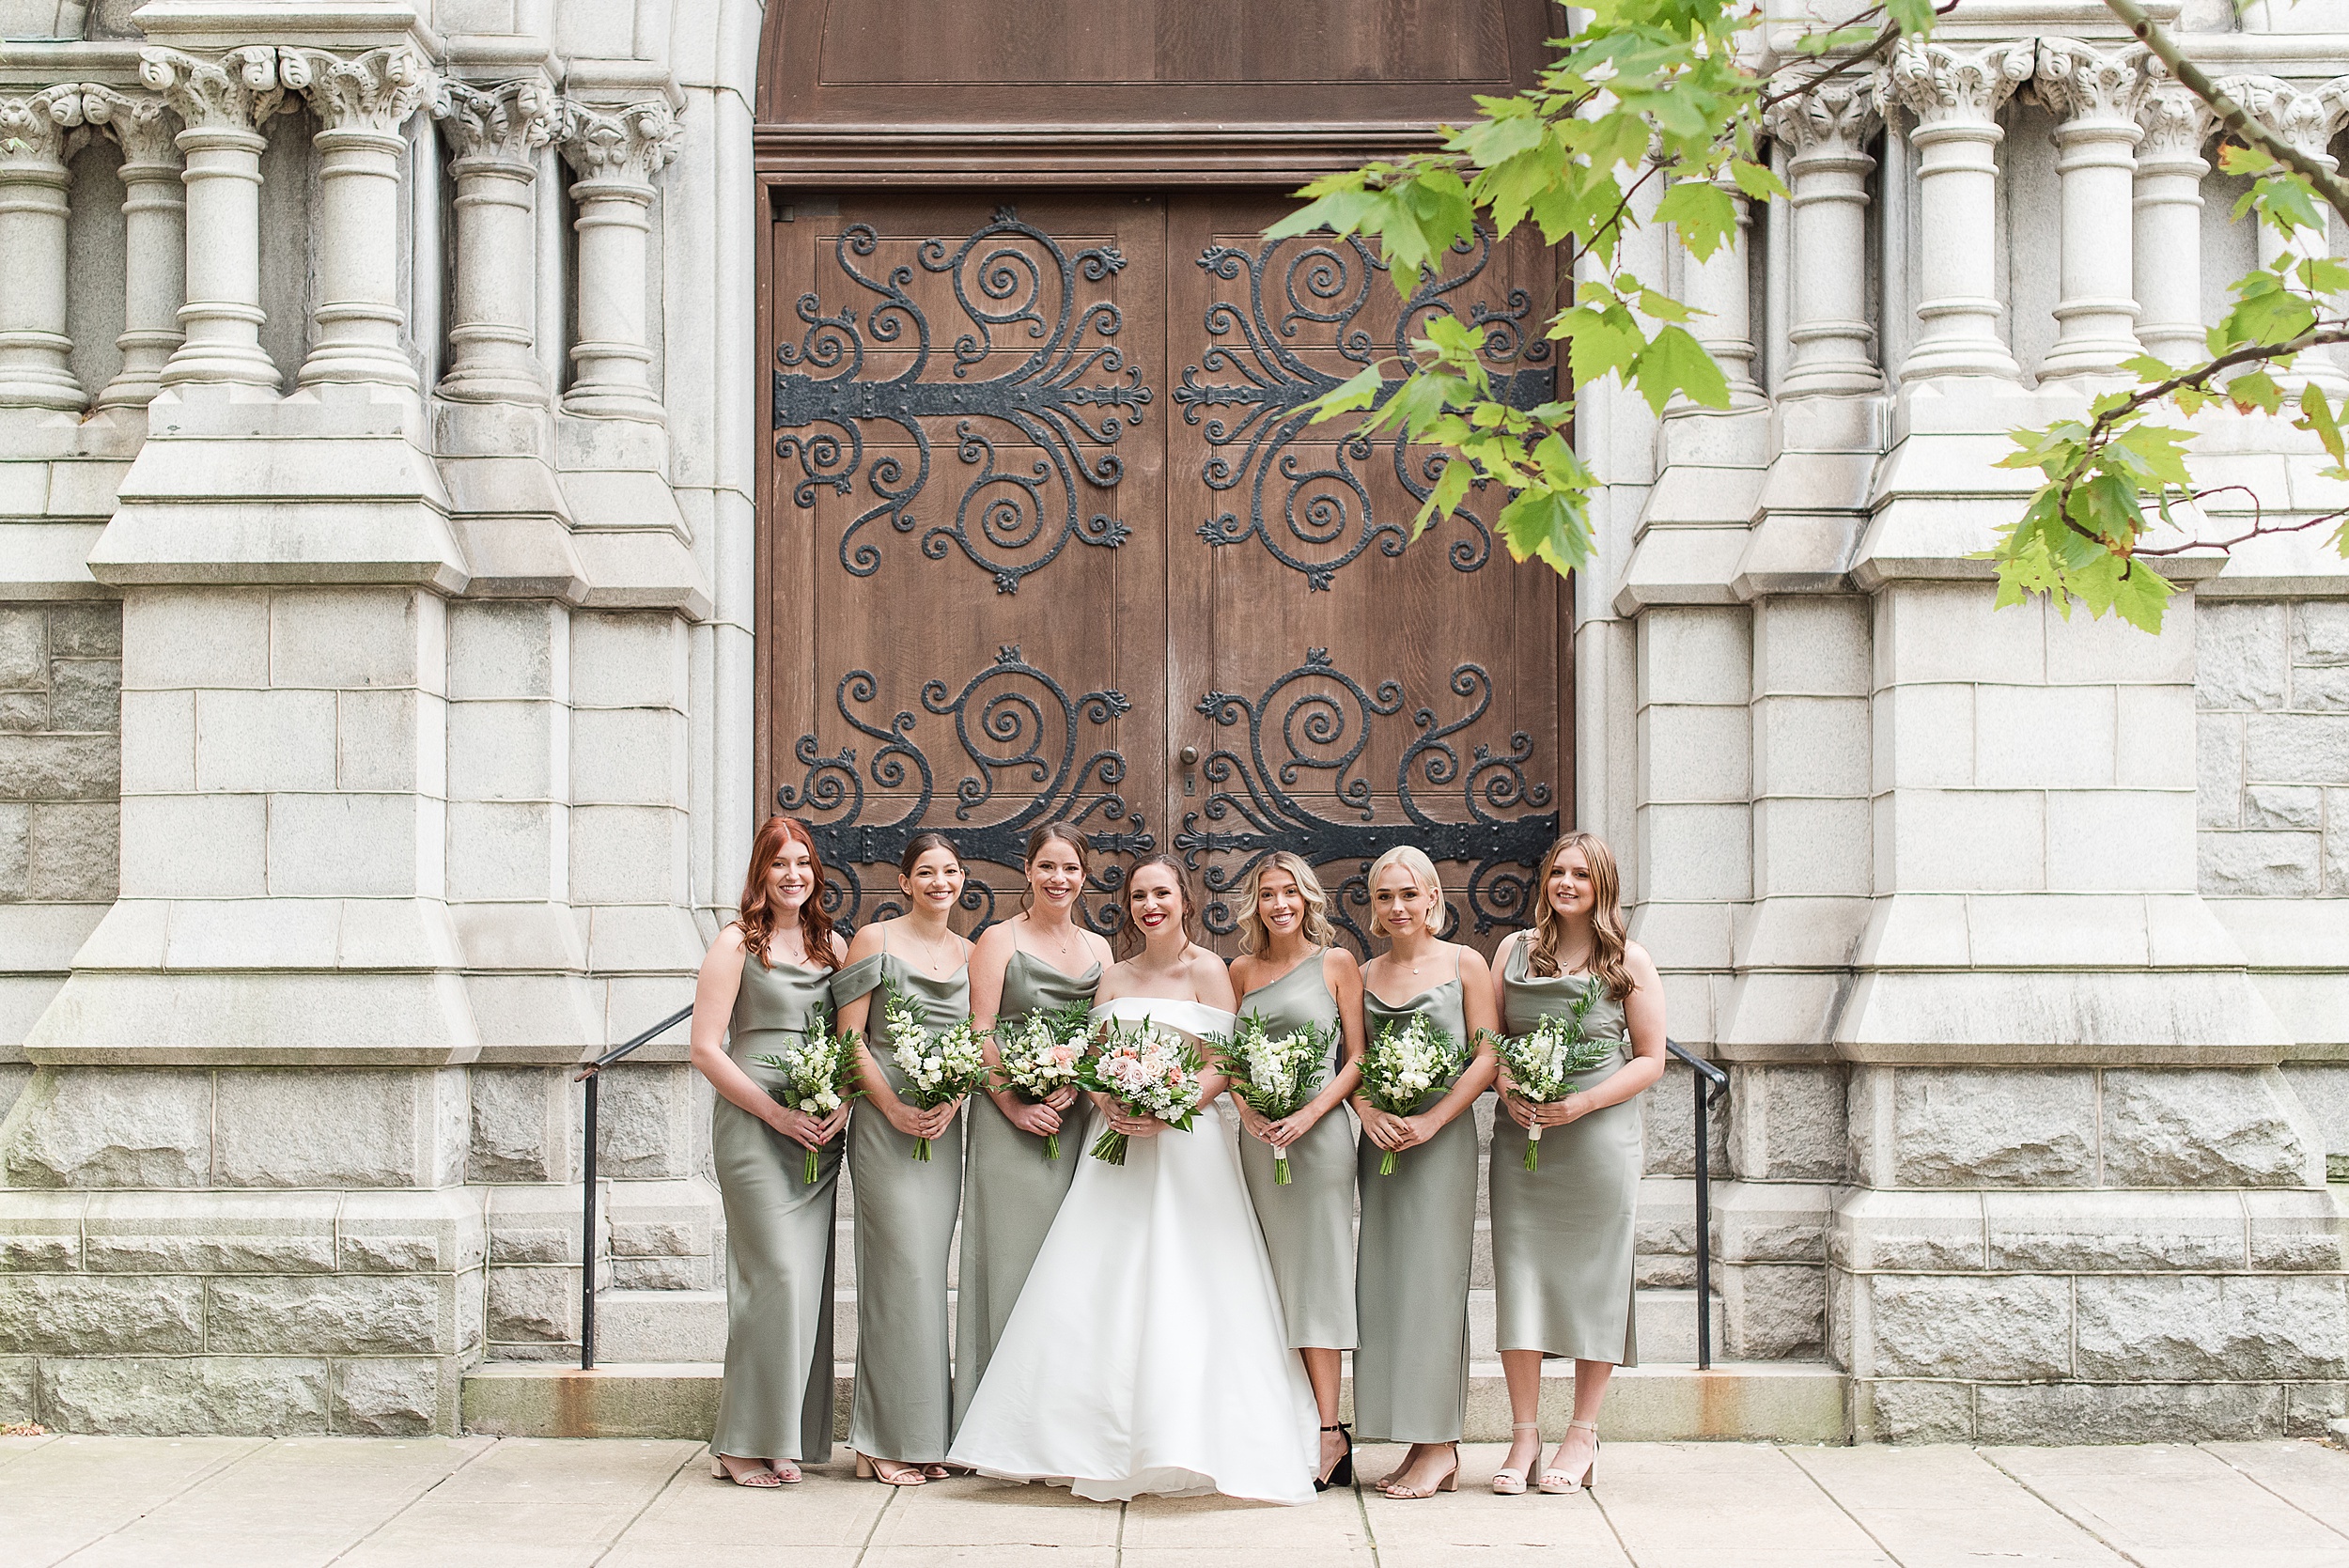 A bride smiles with her bridesmaids in green dresses while standing outside an ornate entrance to one of the incredible Wedding Venues Columbia, MD